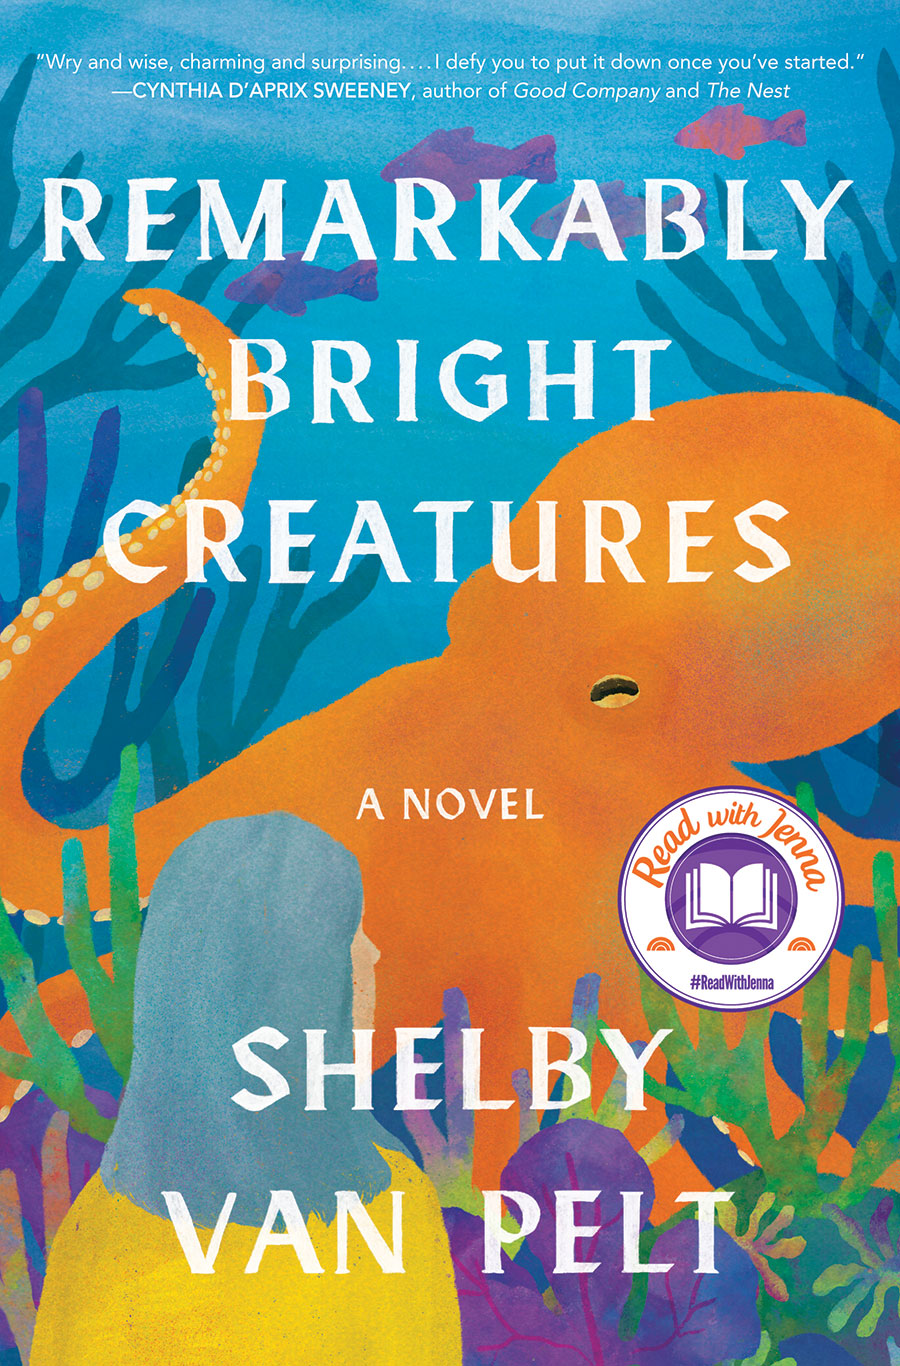 Book Cover for Remarkably Bright Creatures, a colorful cartoon underwater scene with an orange octopus on an ocean floor.